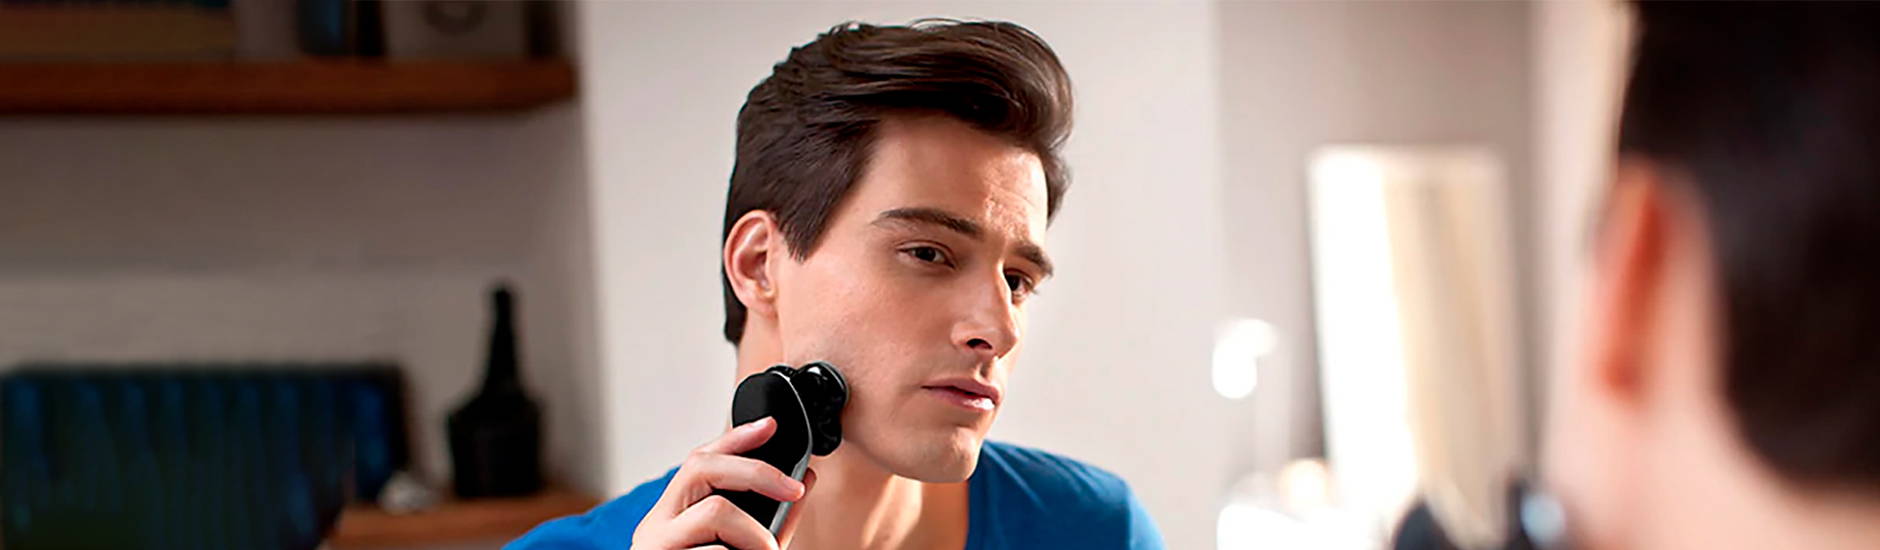 How to Get the Perfect Clean-Shaven Look